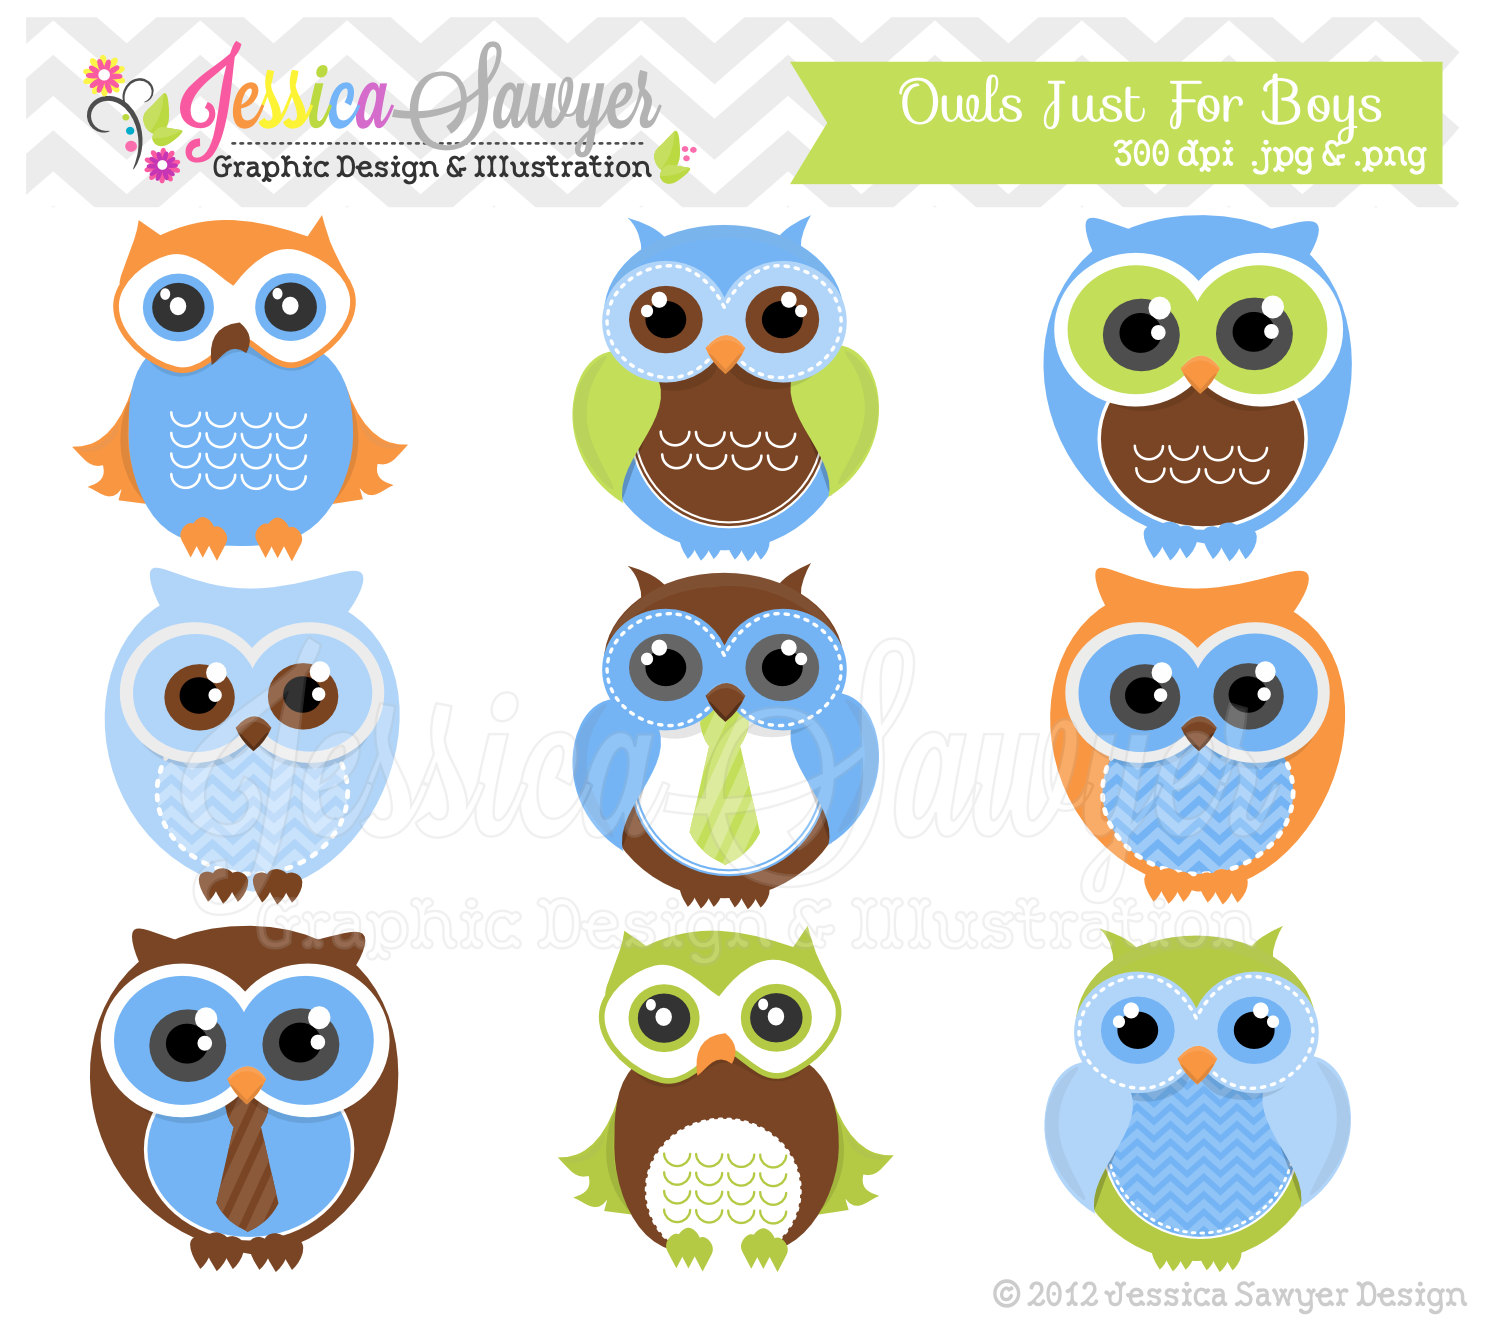 Instant Download Cute Owl Clipart Boy Clip By Jessicasawyerdesign